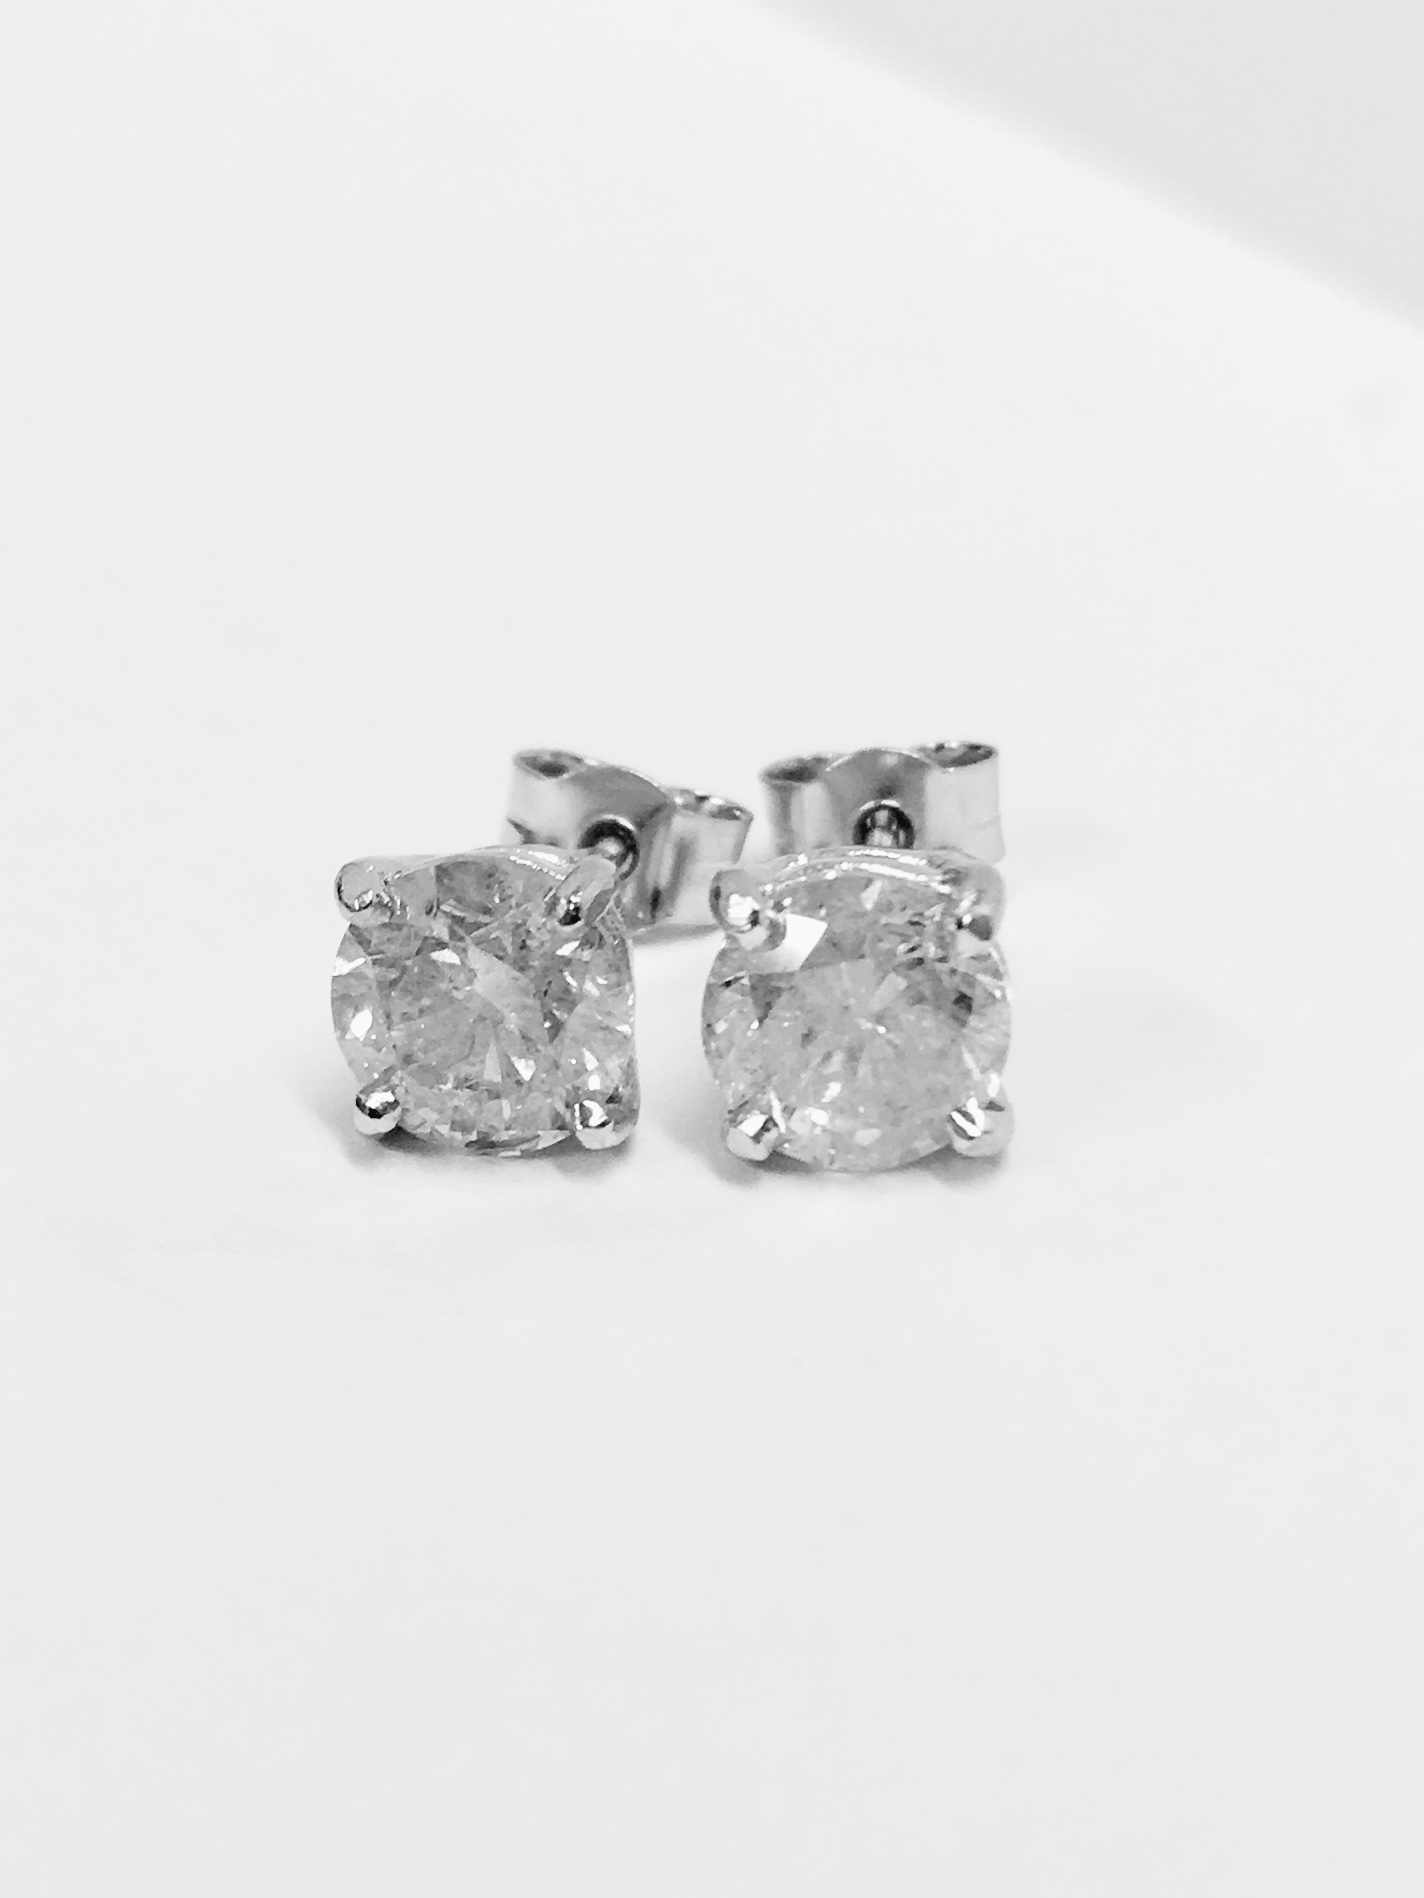 1ct diamond solitaire earrings - Image 3 of 24